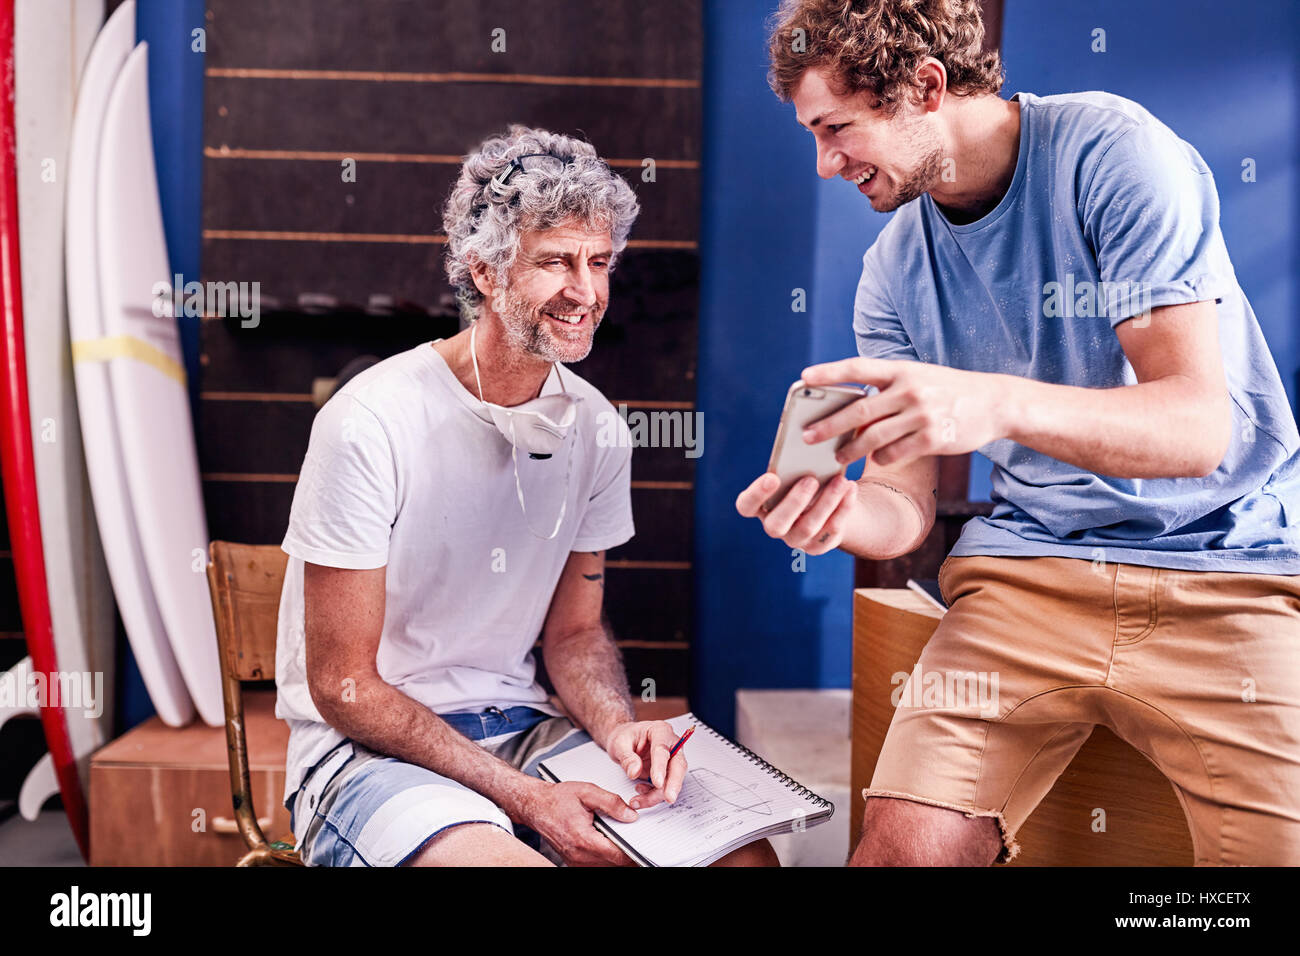 Male surfboard designers with cell phone brainstorming in workshop Stock Photo